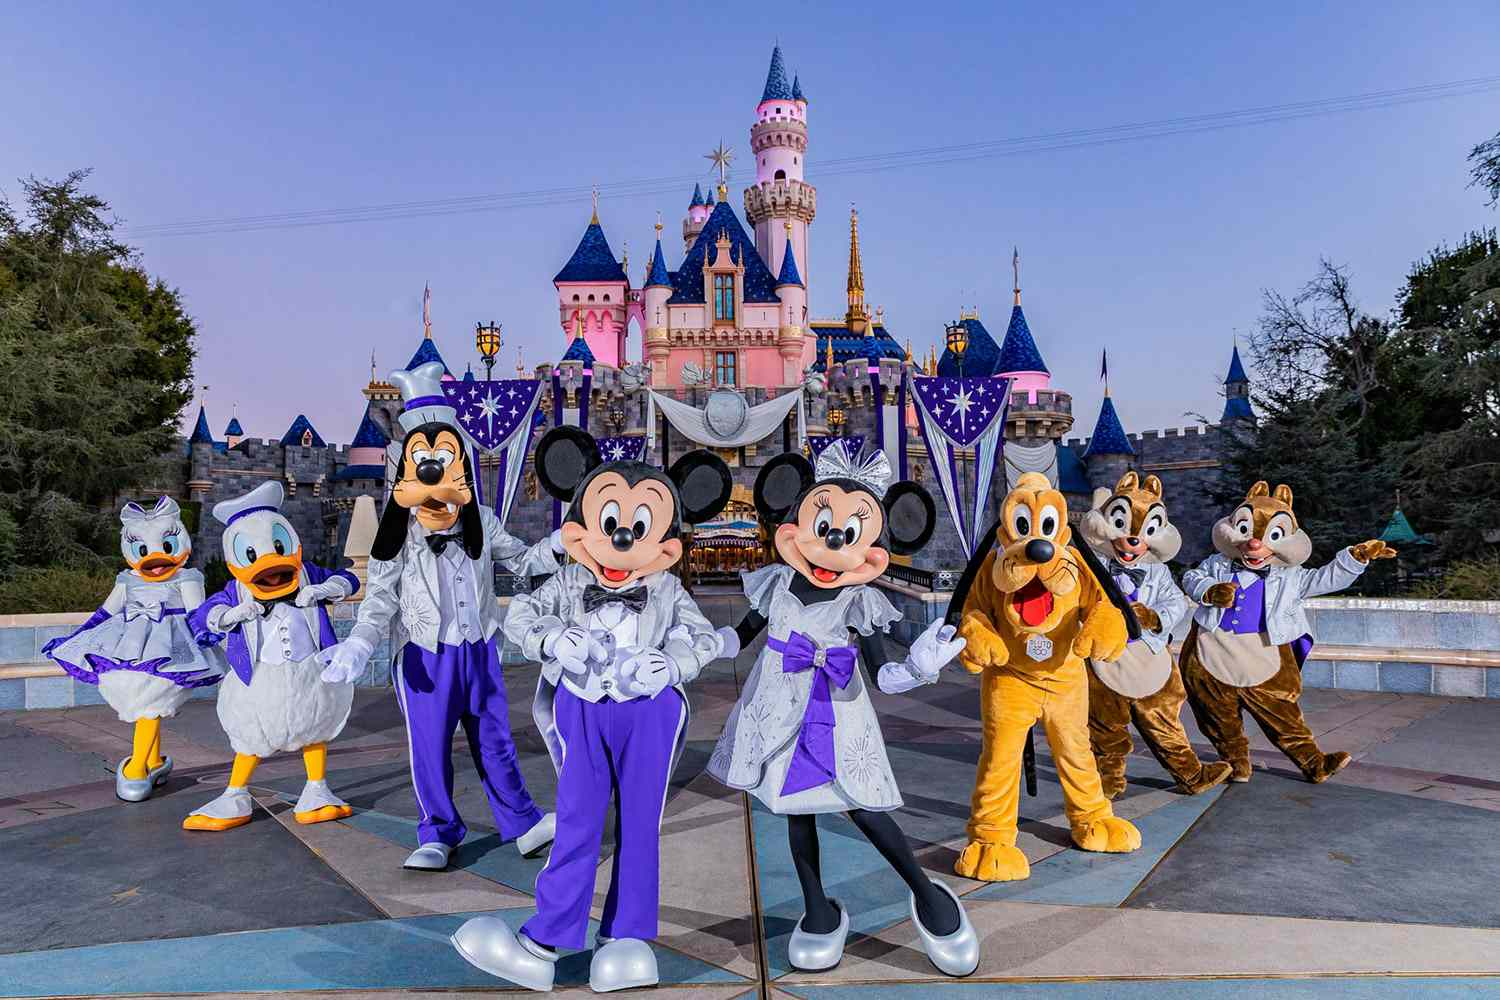 A picture of the Disney 100 celebrations at Disneyland (Courtesy: People Magazine)

